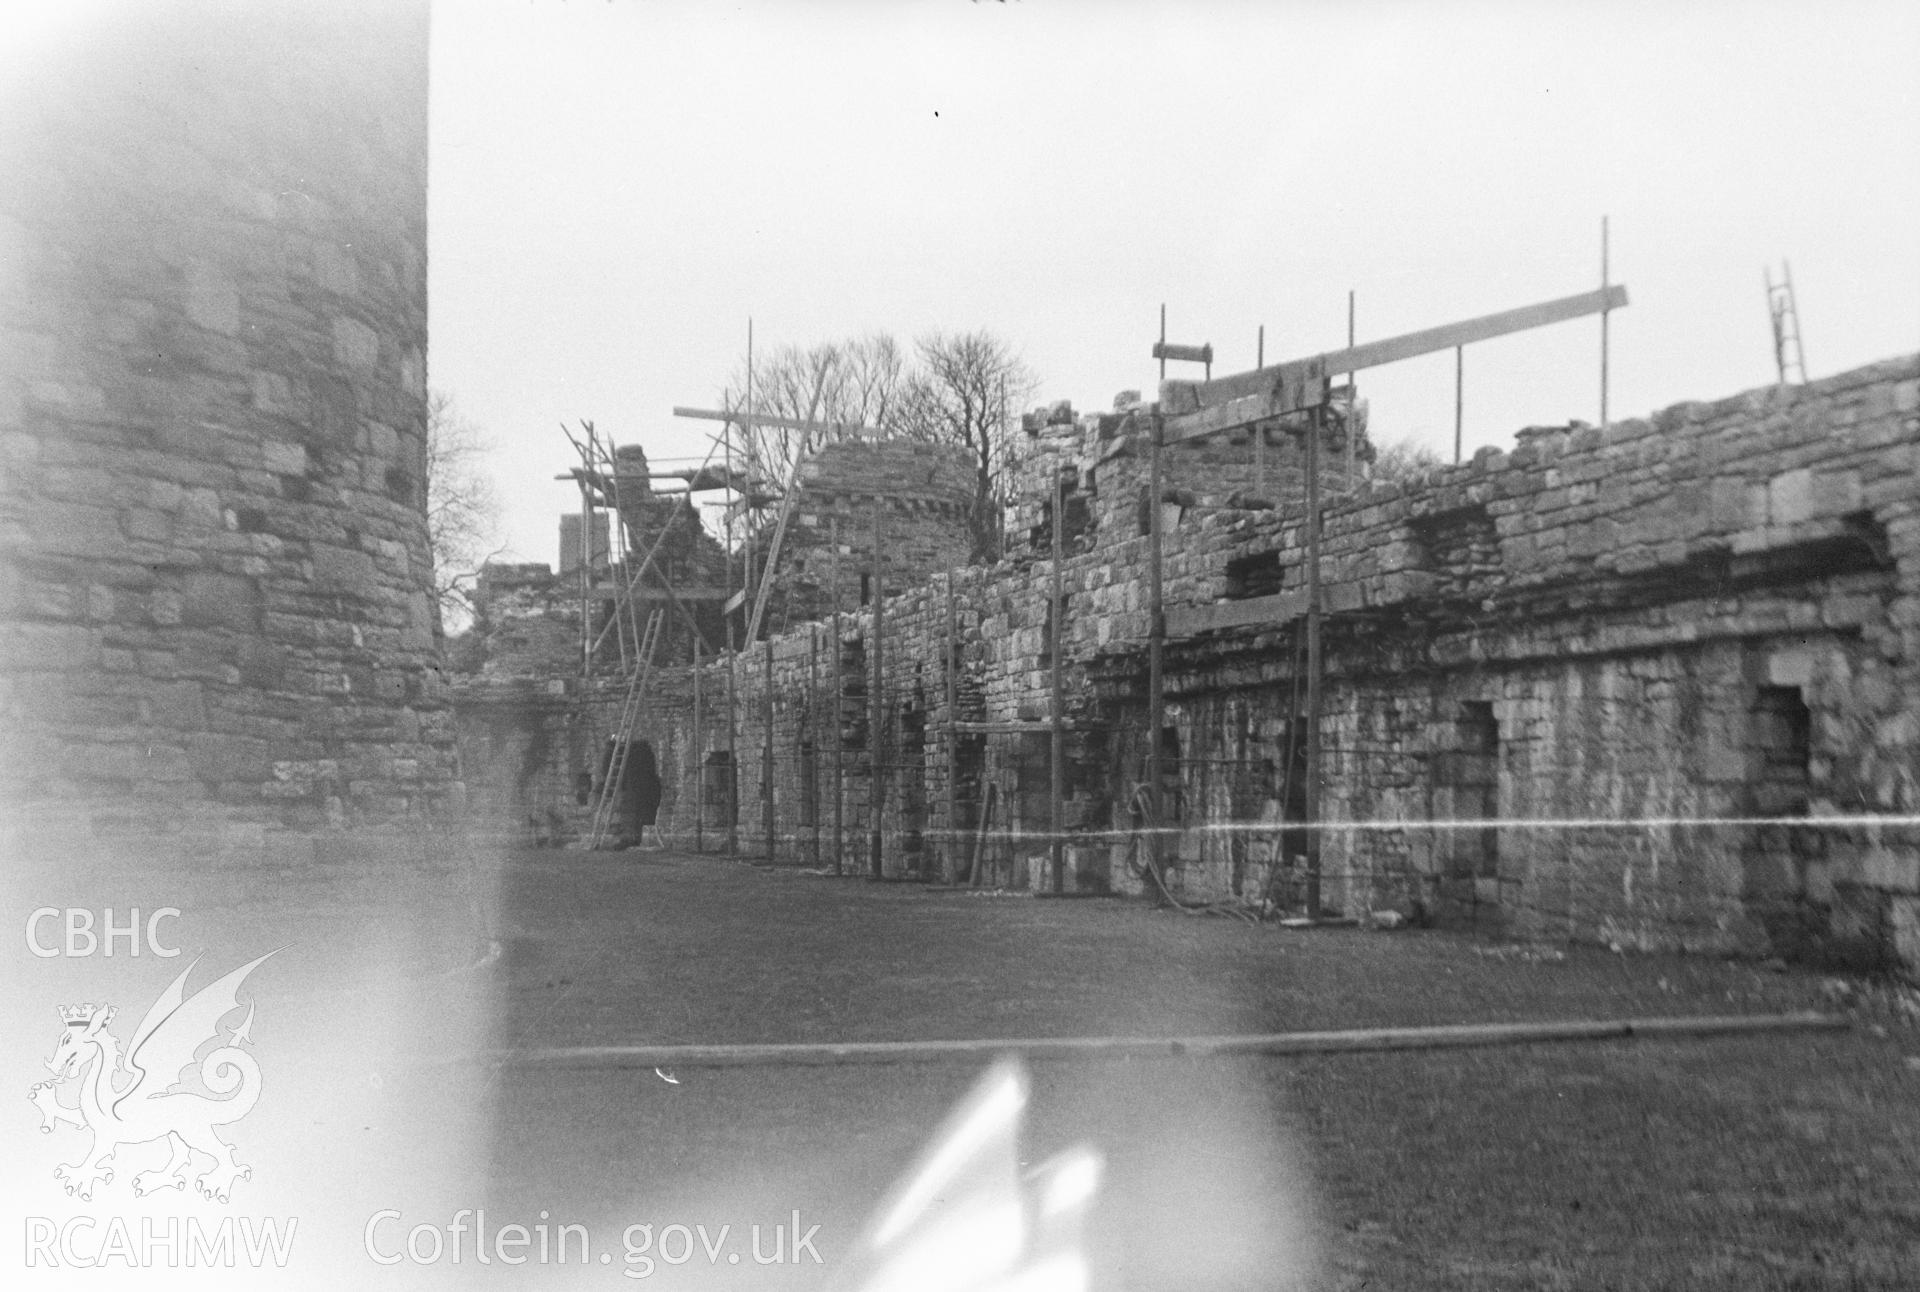 Digital copy of a c.1928 nitrate negative showing view of Beaumaris Castle.